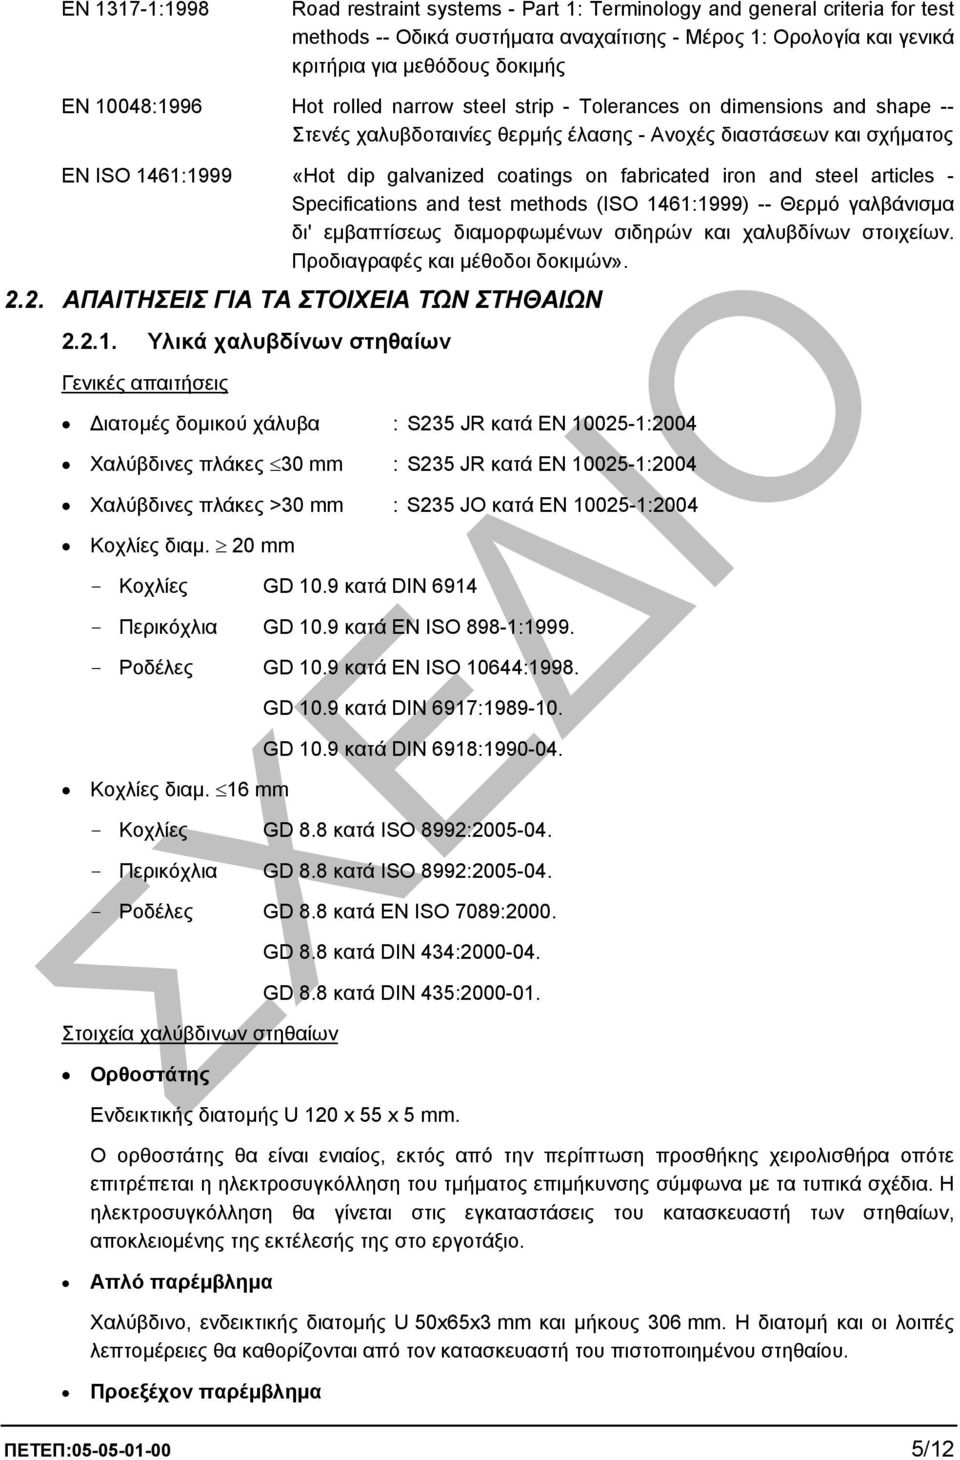 fabricated iron and steel articles - Specifications and test methods (ISO 1461:1999) -- Θερµό γαλβάνισµα δι' εµβαπτίσεως διαµορφωµένων σιδηρών και χαλυβδίνων στοιχείων.